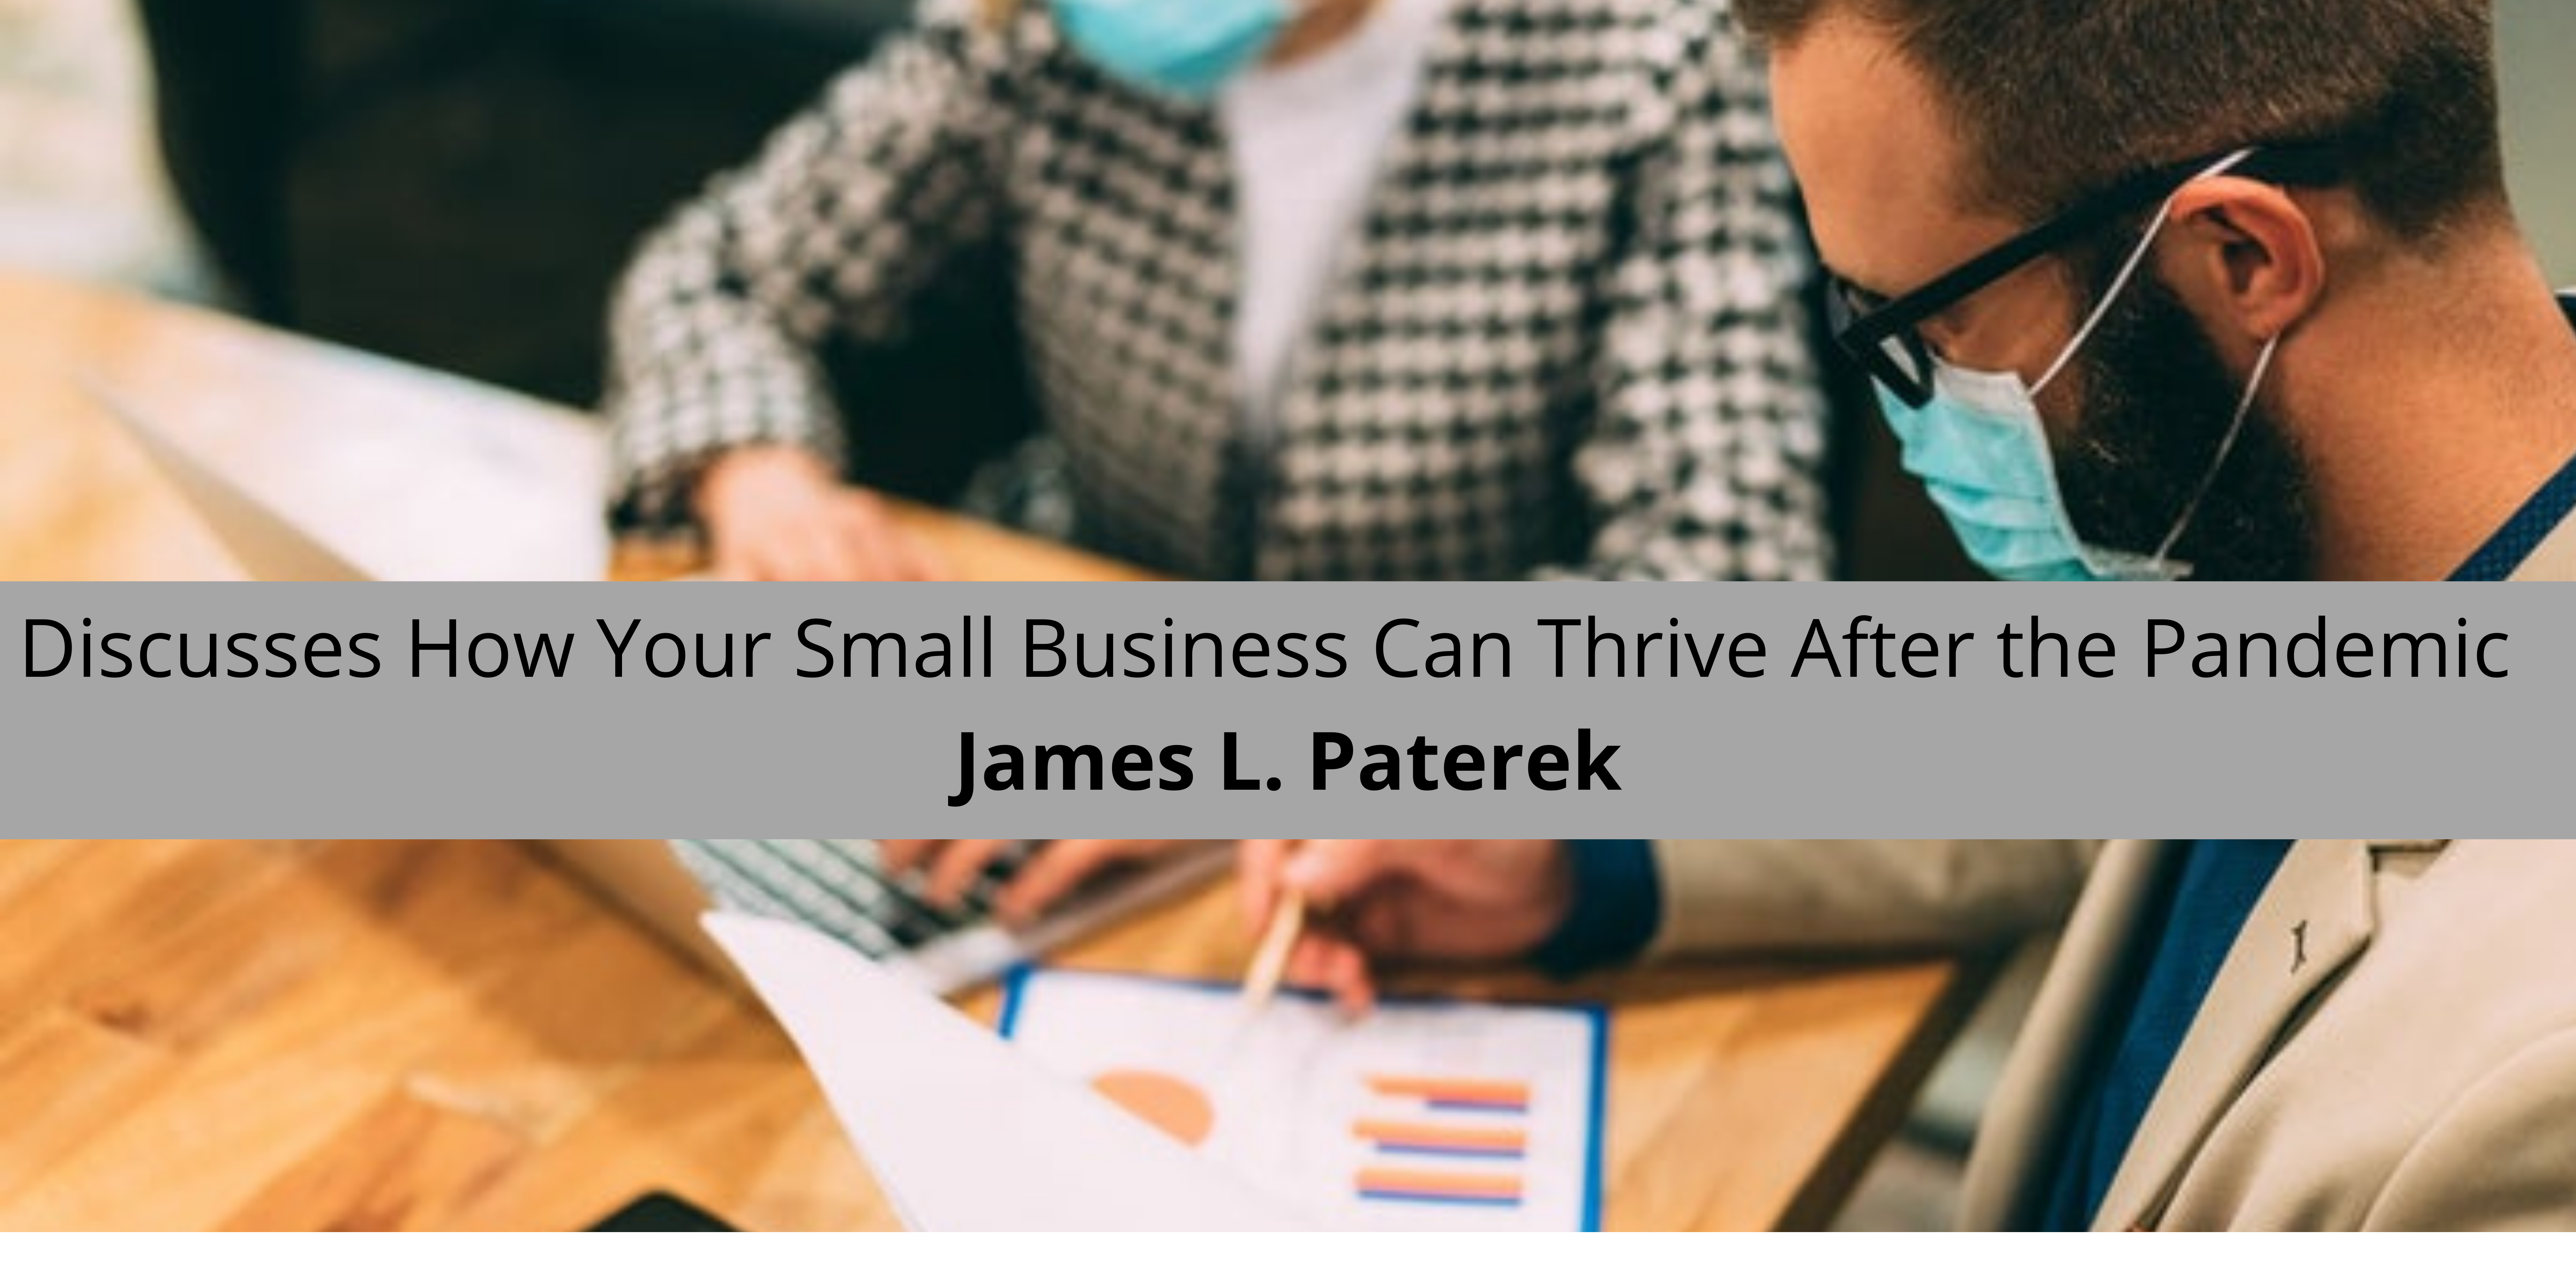 James L. Paterek Discusses How Your Small Business Can Thrive After the Pandemic